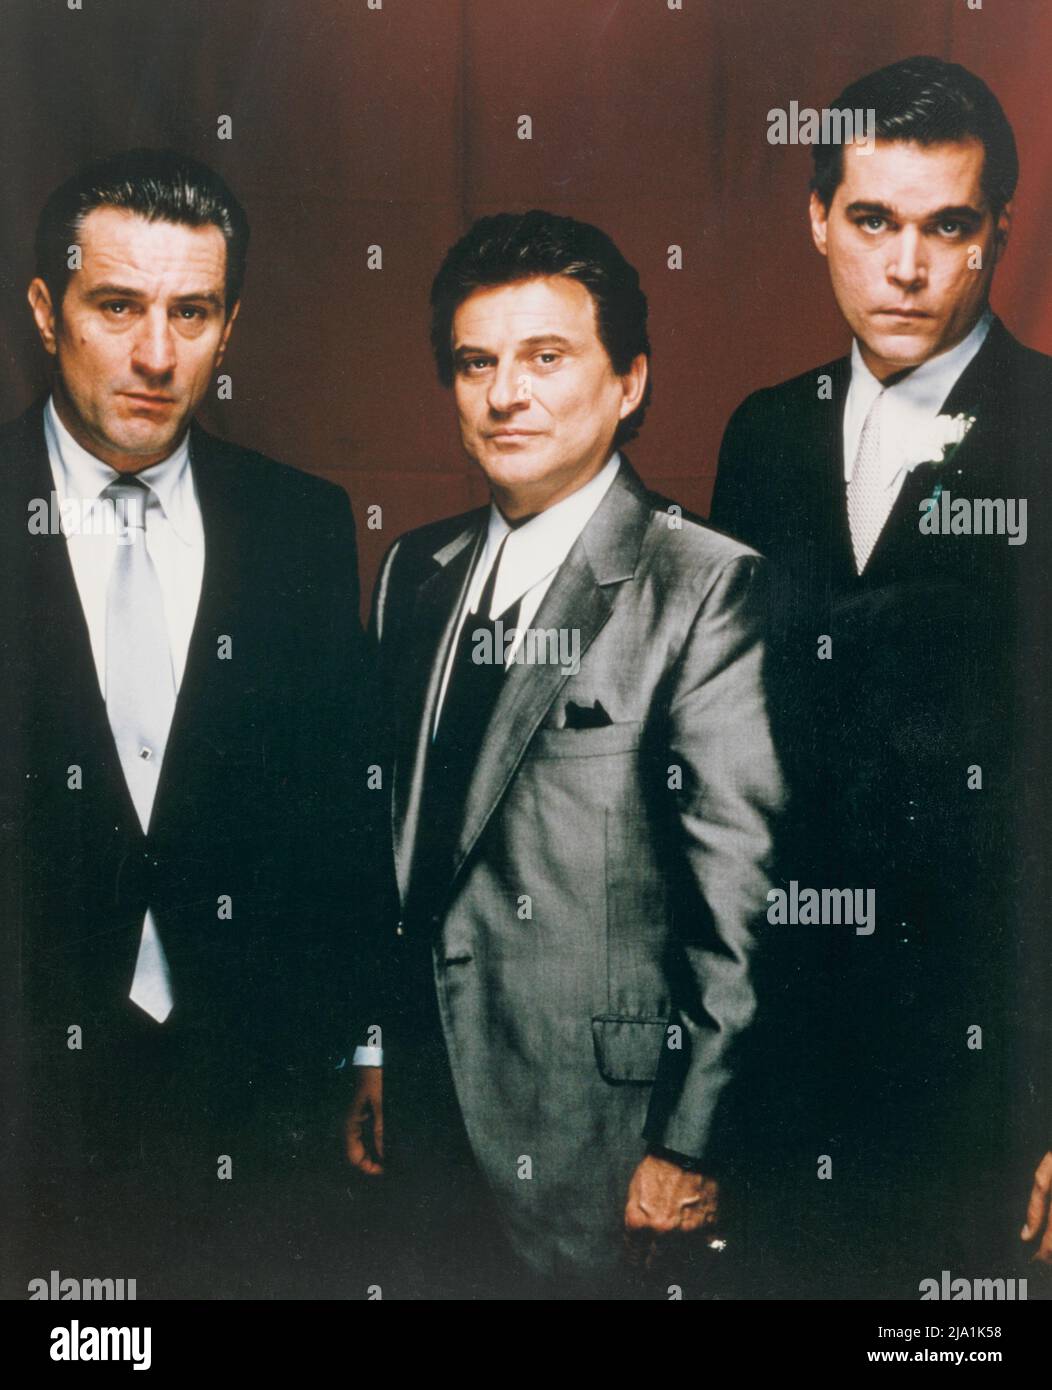 RELEASE DATE: September 19, 1990 MOVIE TITLE: Goodfellas STUDIO: CBS DIRECTOR: Martin Scorsese PLOT: The story of Irish-Italian American, Henry Hill, and how he lives day-to-day life as a member of the Mafia. Based on a true story, the plot revolves around Henry and his two unstable friends Jimmy and Tommy as they gradually climb the ladder from petty crime to violent murders. PICTURED: ROBERT DE NIRO as James 'Jimmy' Conway, JOE PESCI as Tommy DeVito, RAY LIOTTA as Henry Hill. (Credit Image: © Warner Bros. Pictures/Entertainment Pictures) Stock Photo